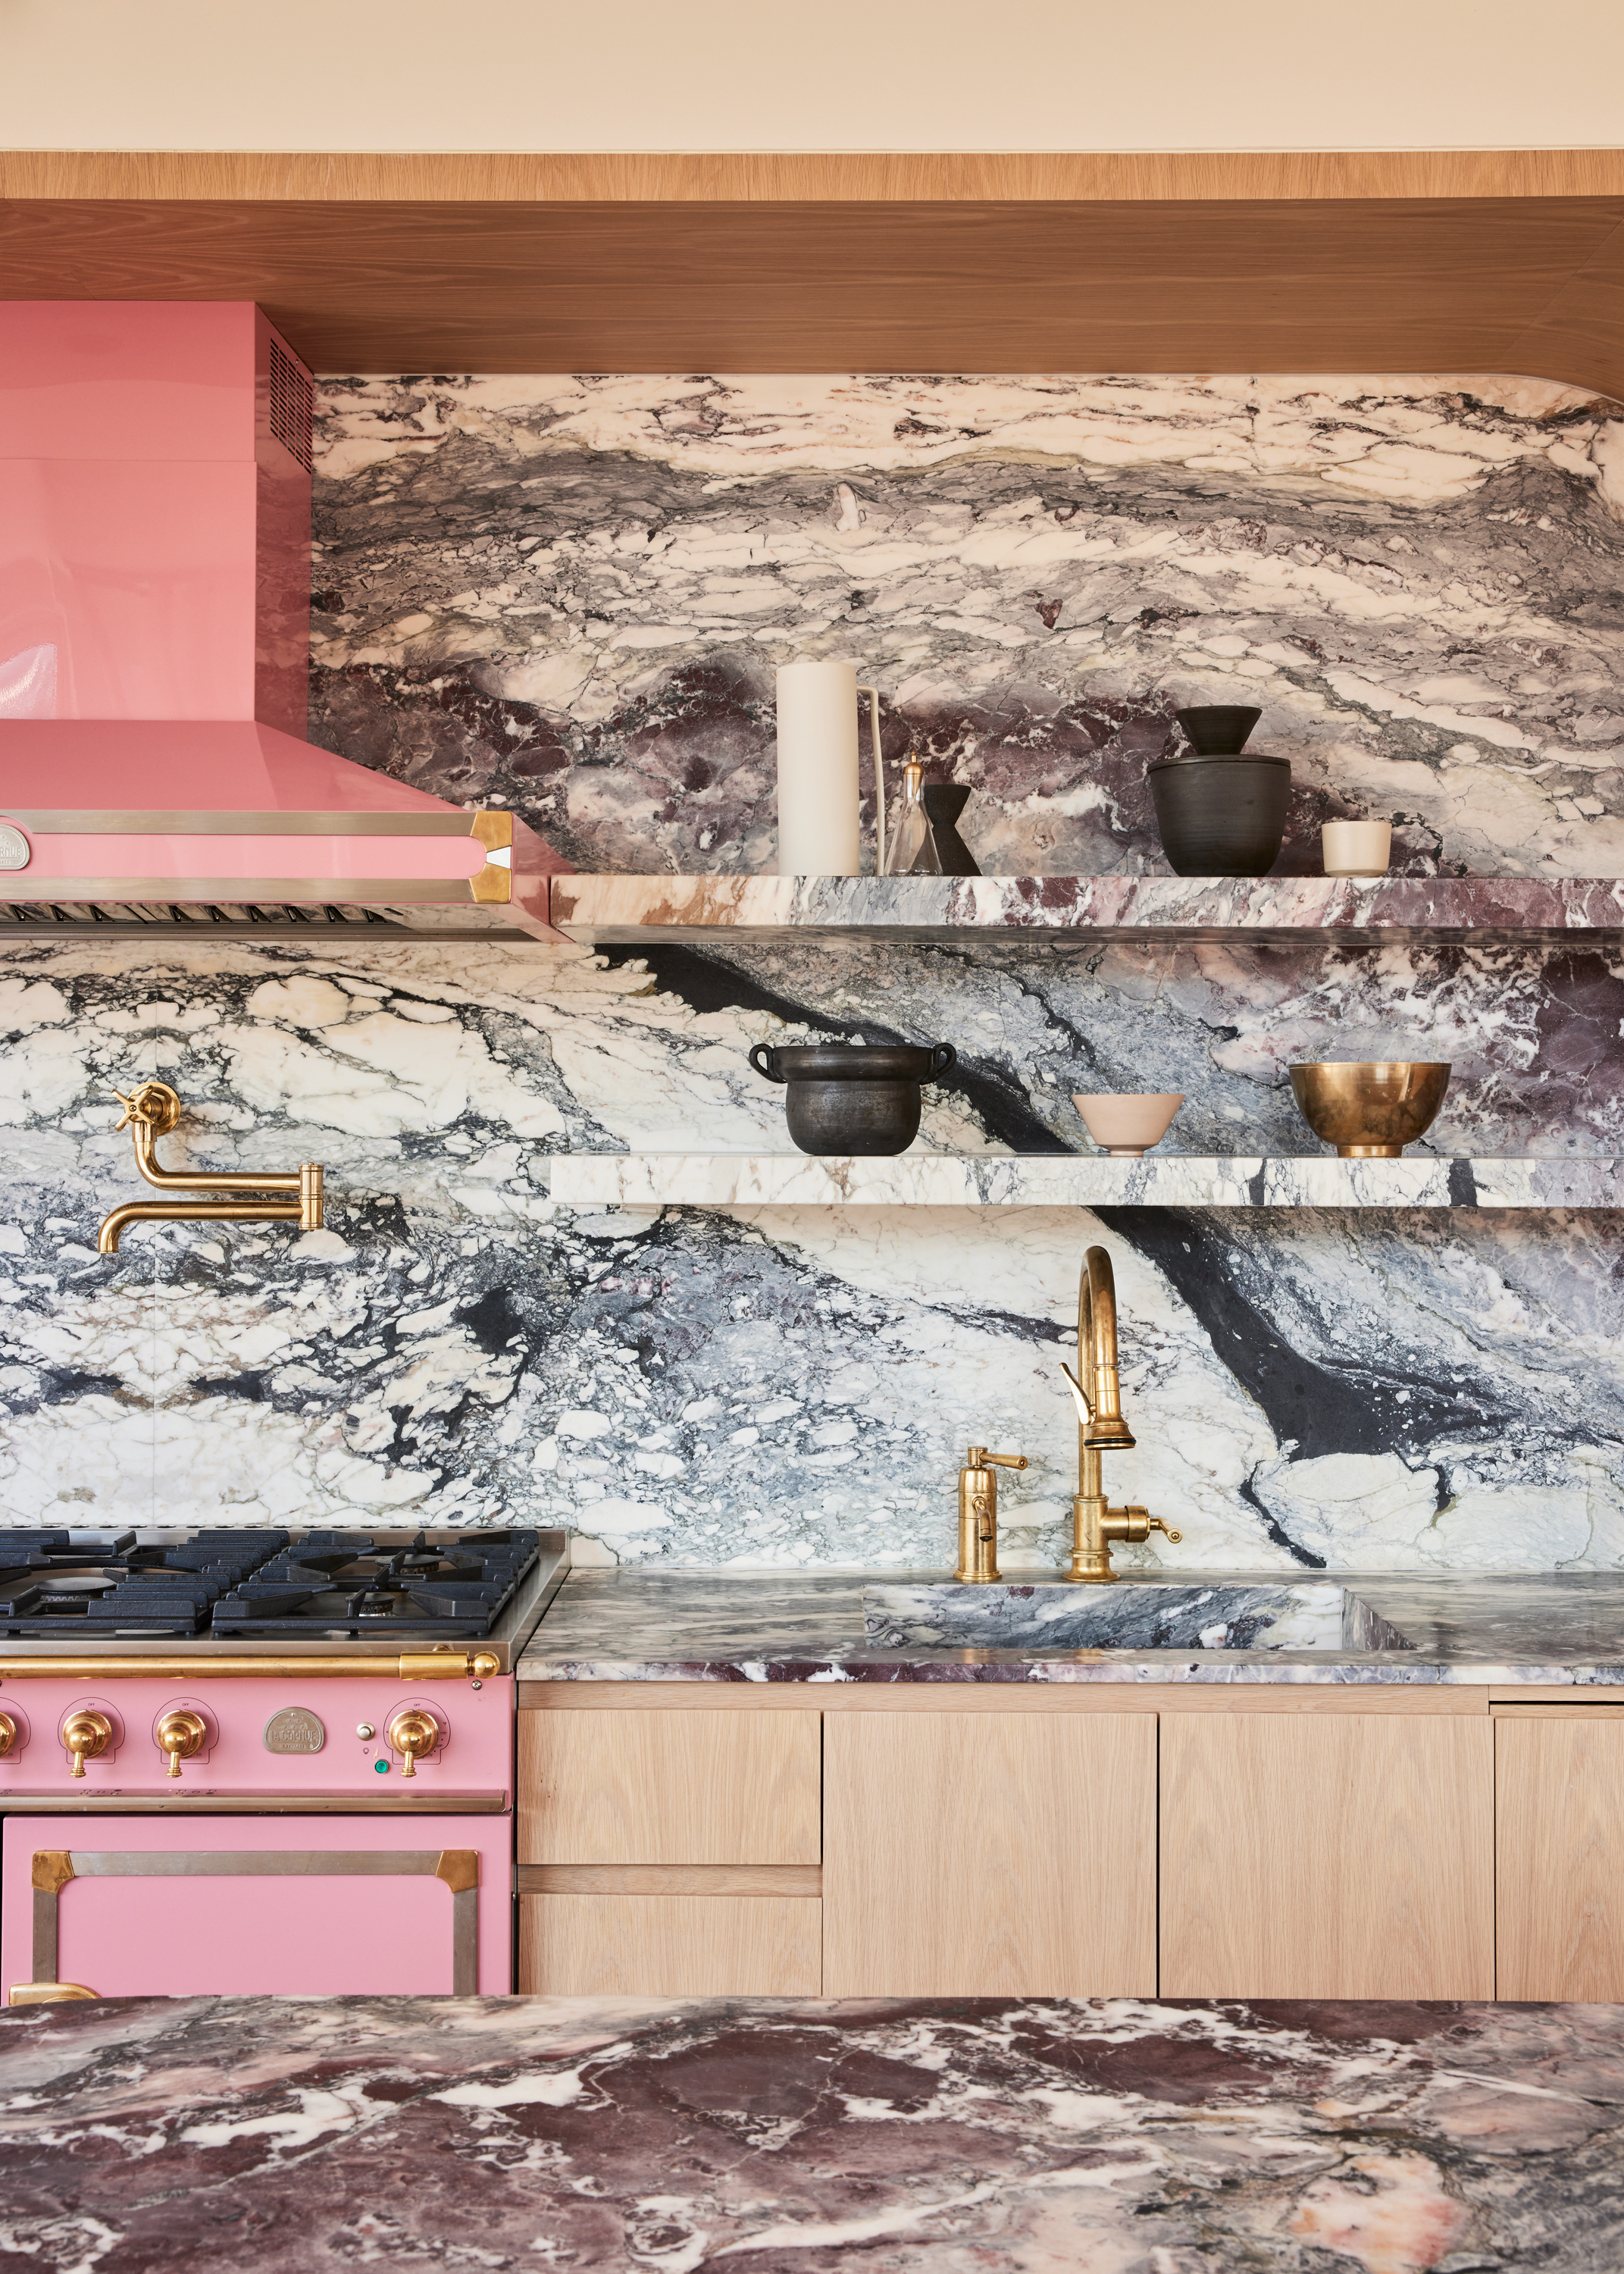 With Pink and Marble Flourishes, This New York Pad Is a